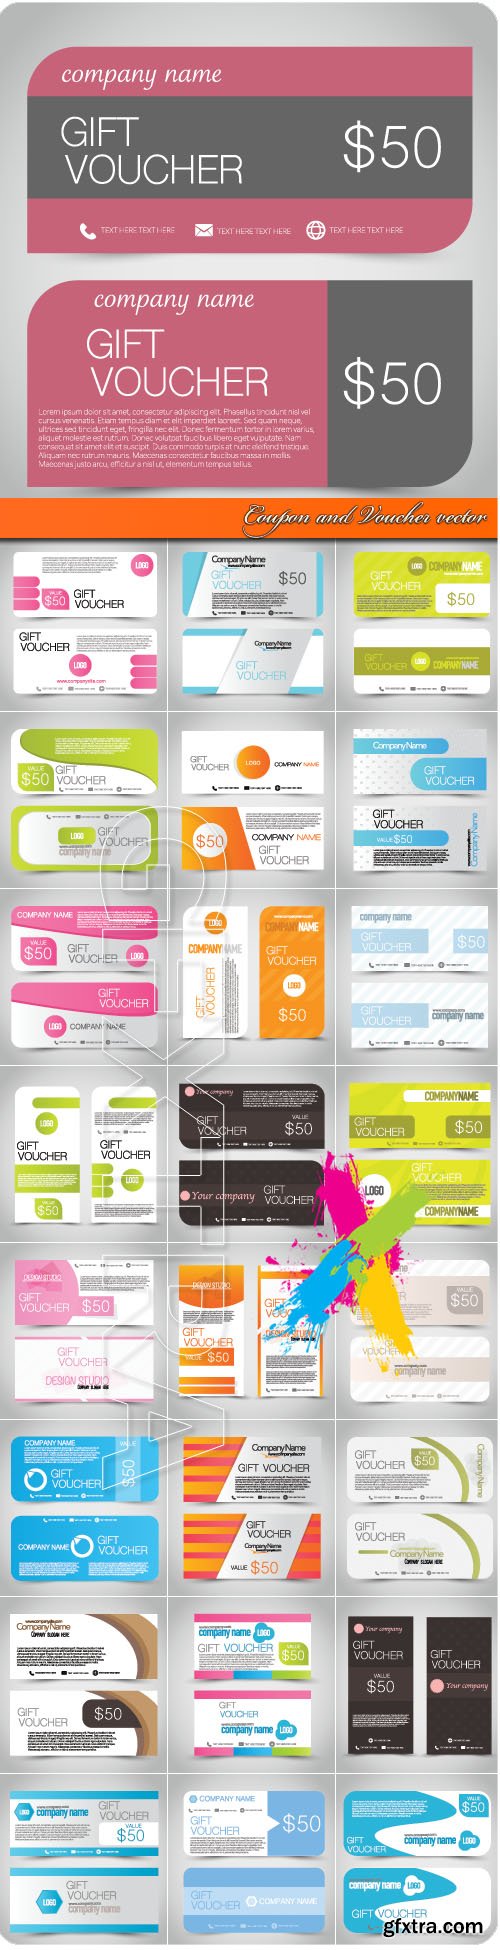 Coupons and Vouchers vector